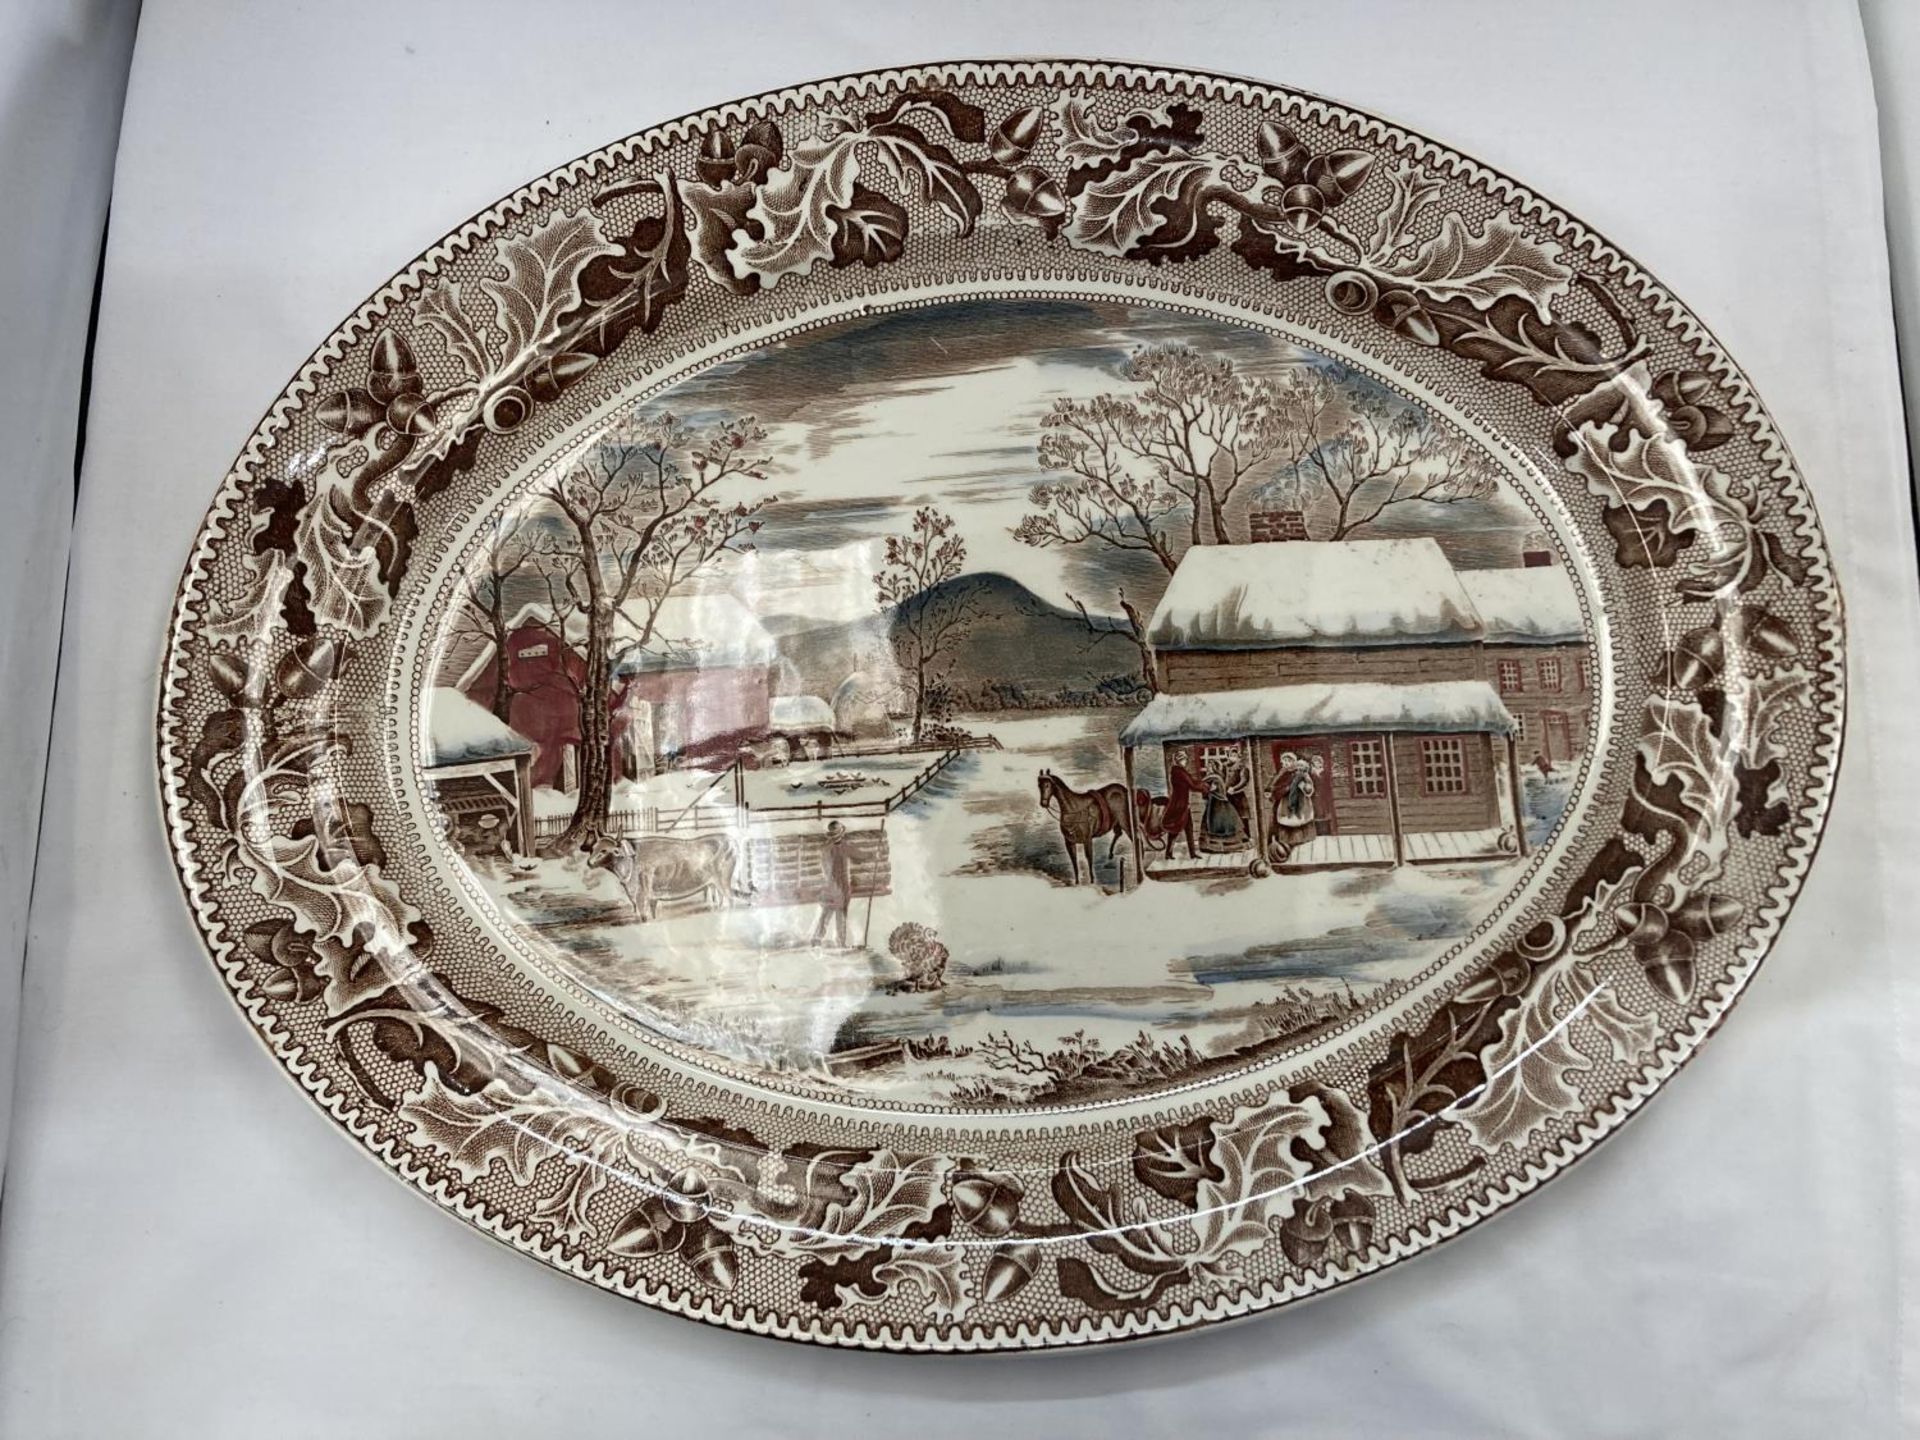 A LARGE JOHNSON BROS OVAL MEAT PLATTER WITH A FARMYARD SCENE - HOME FOR HISTORIC AMERICA - Image 2 of 9